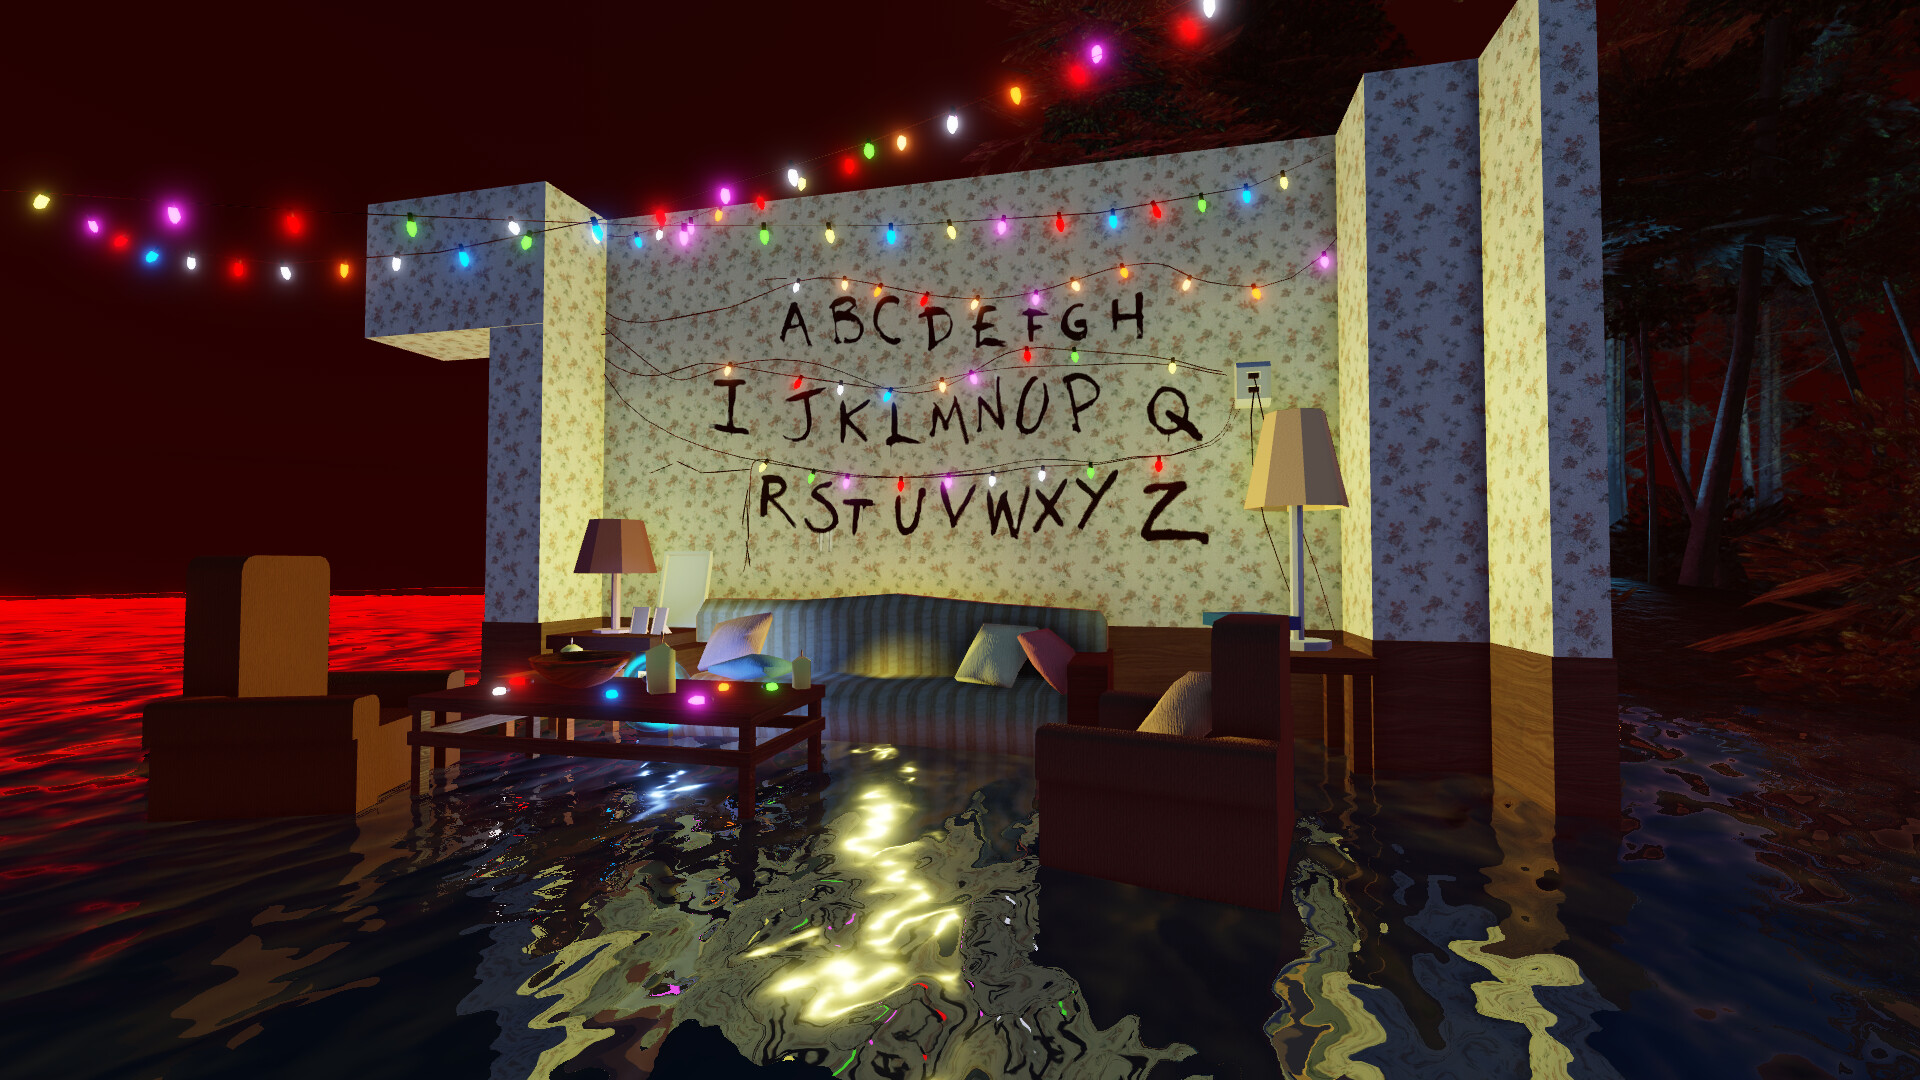 Roblox's Stranger Things Event • Day 2 ×